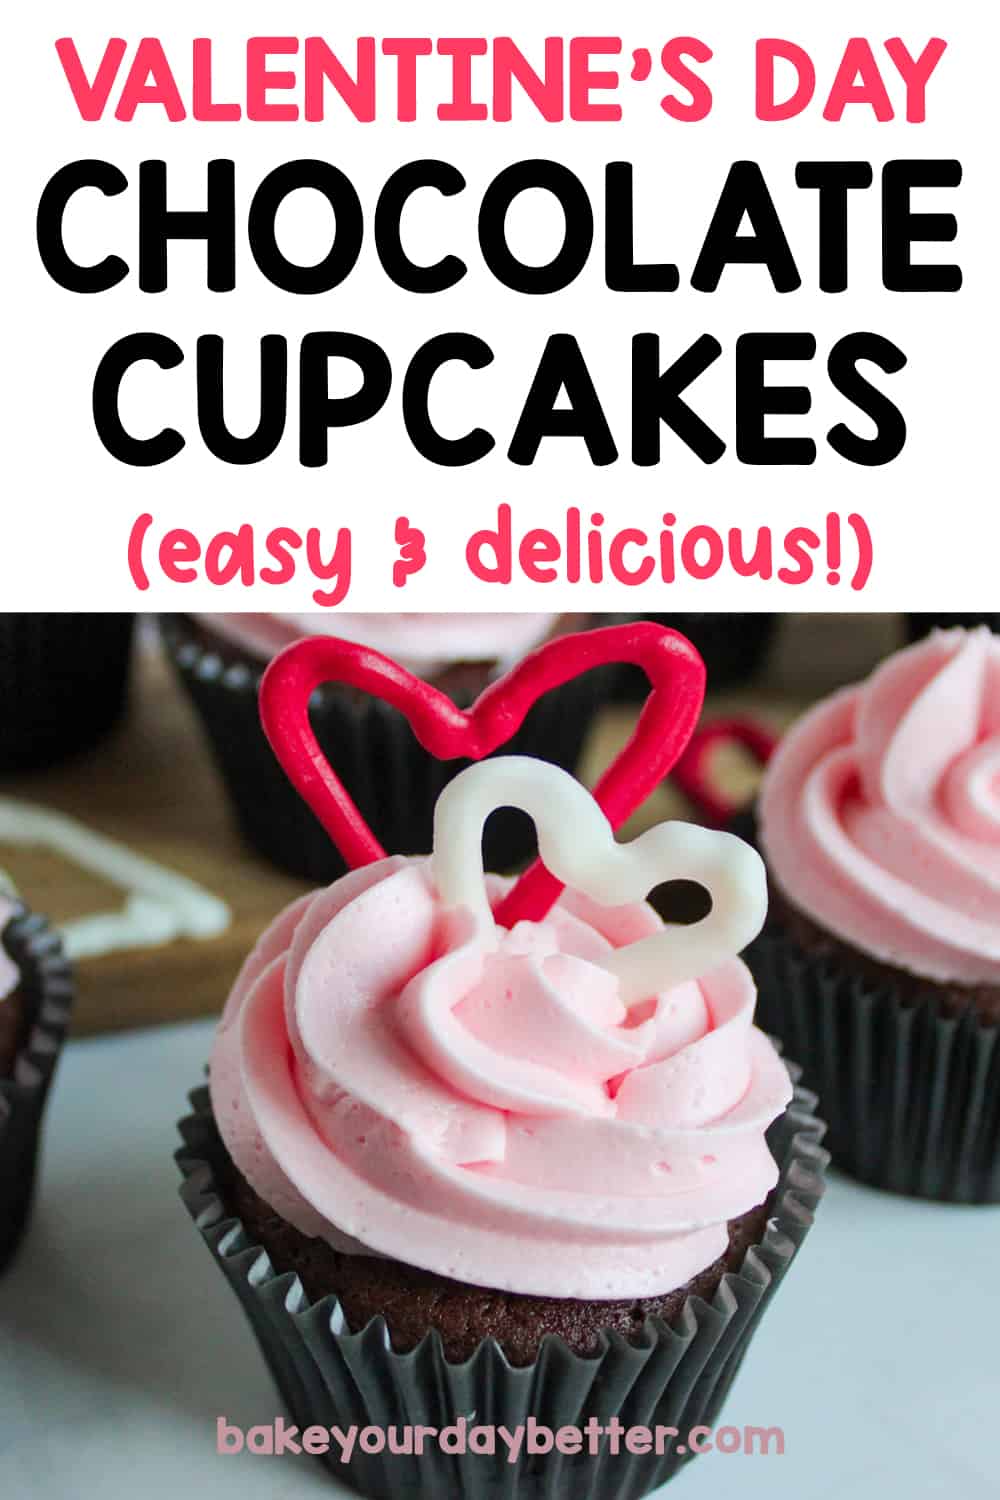 pinterest pin that says: valentine's day chocolate cupcakes (easy and delicious!)